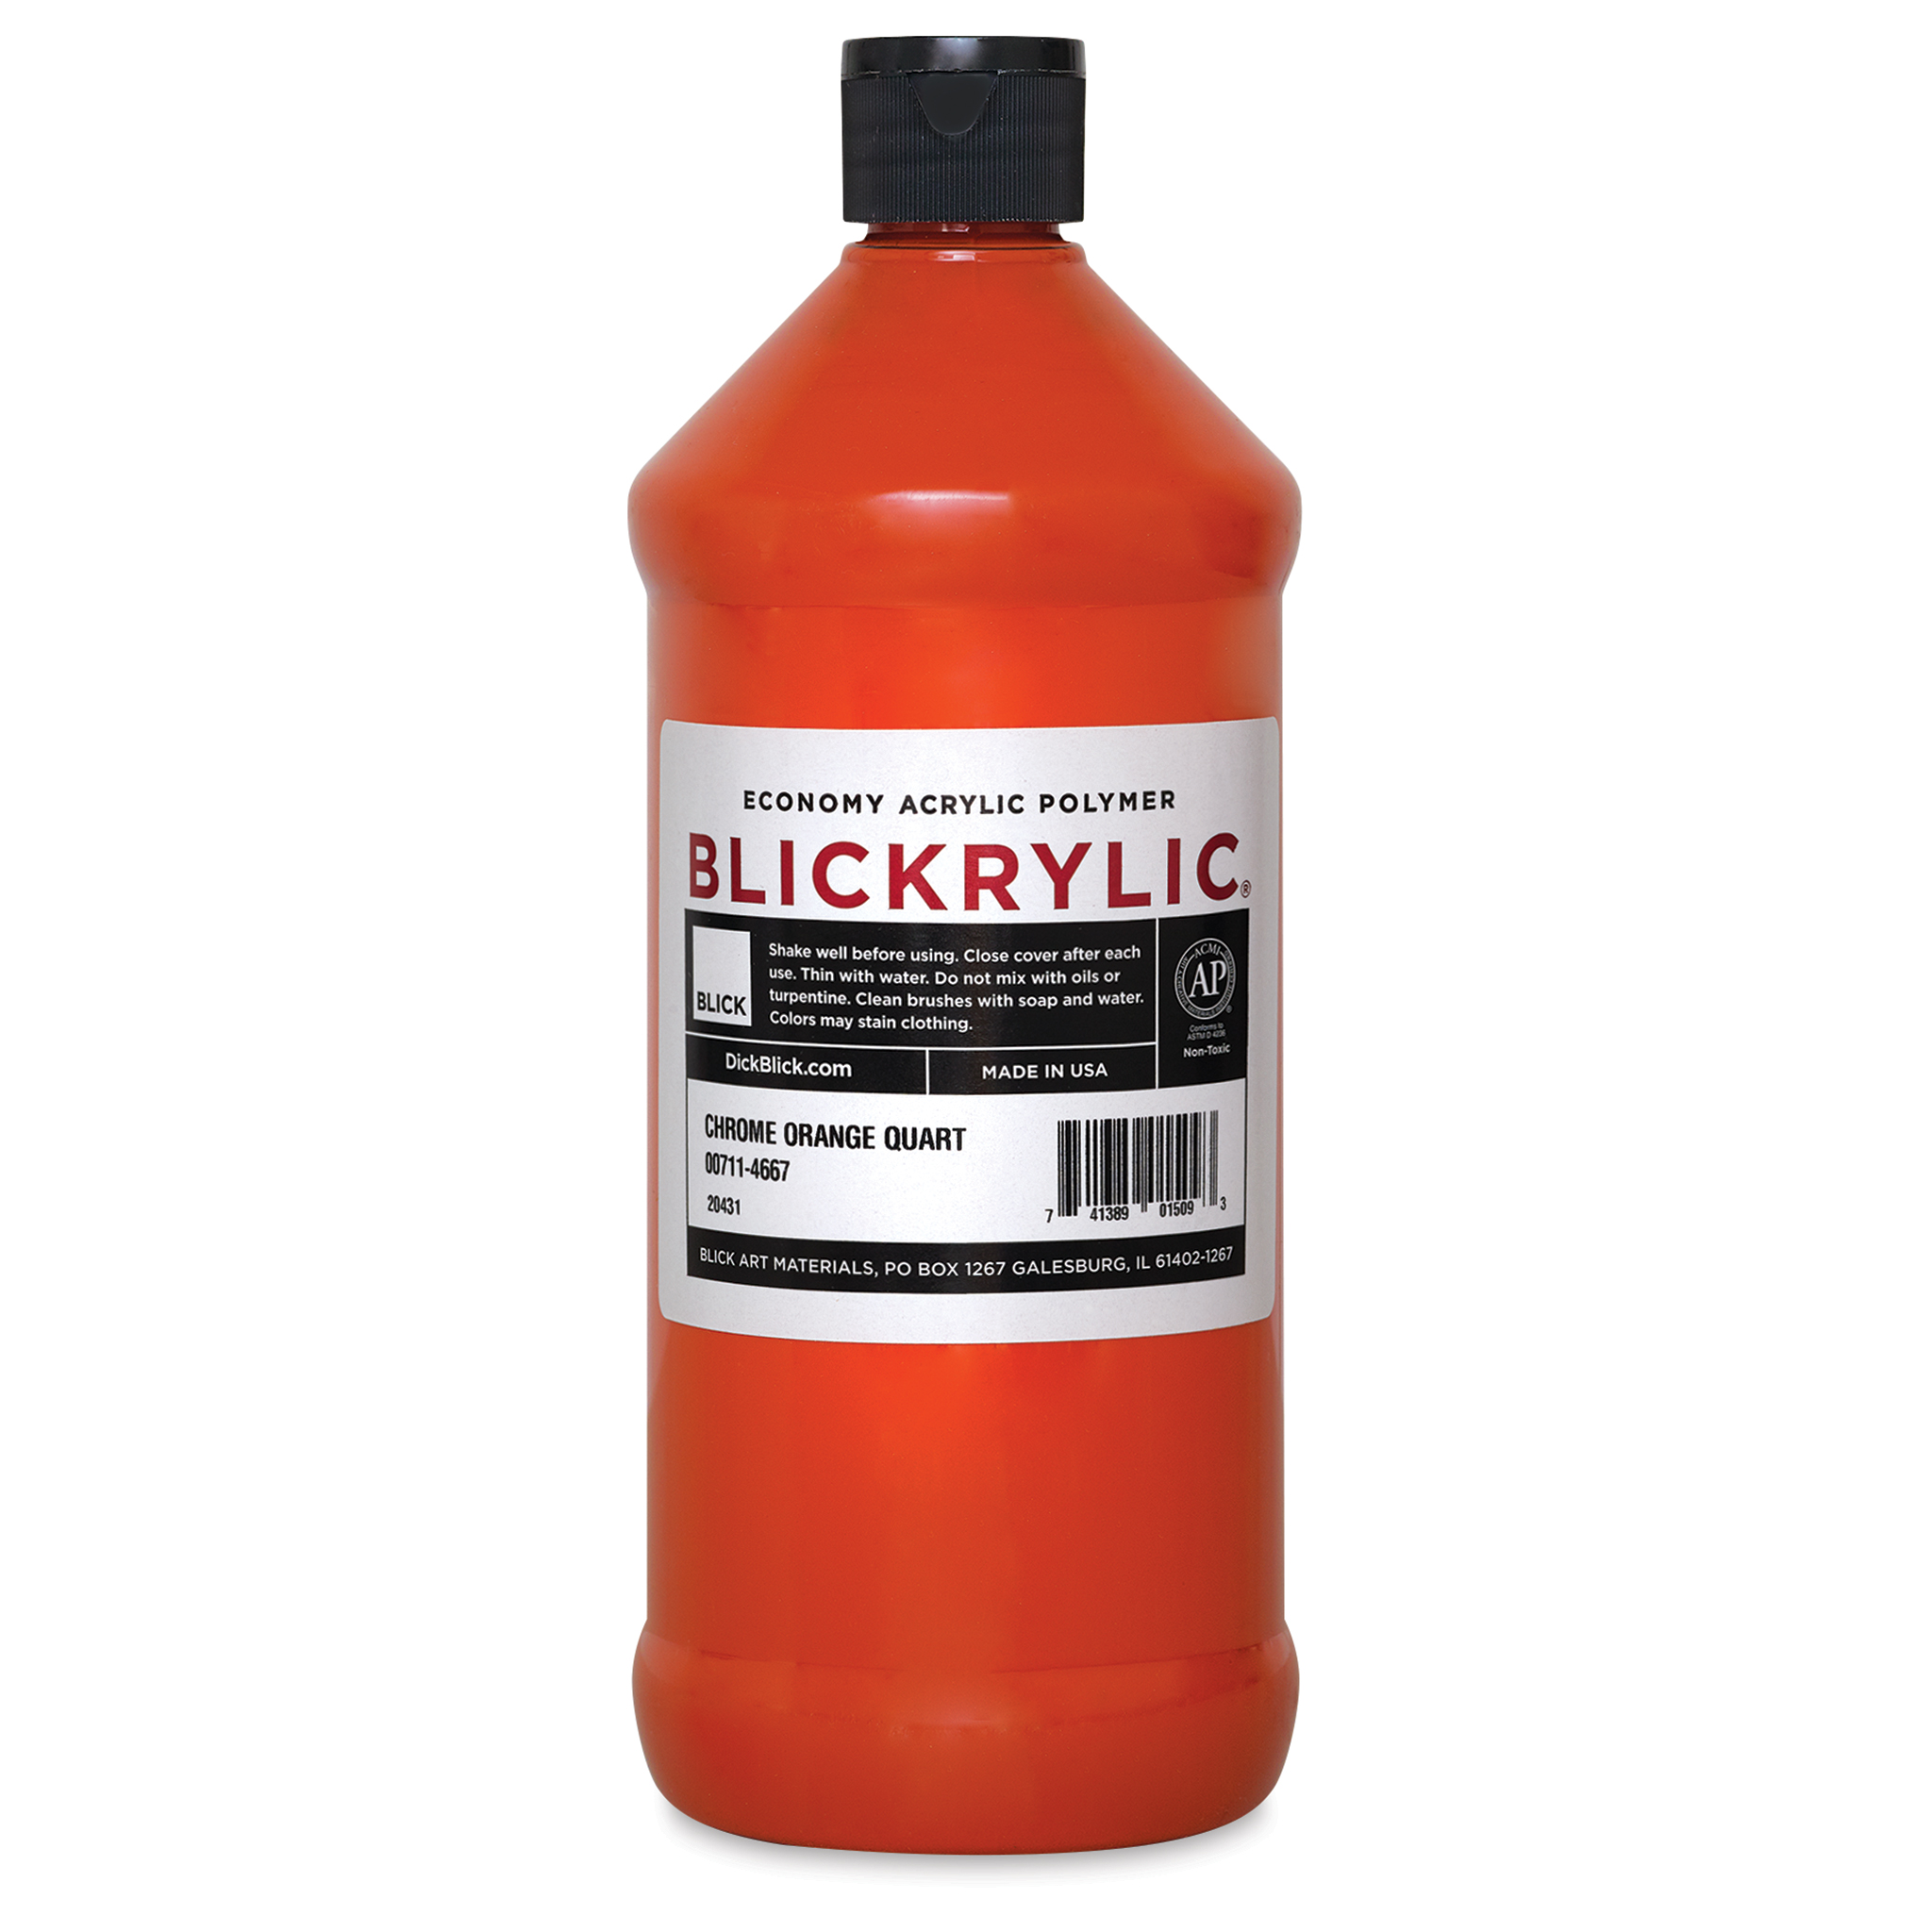 Blickrylic Student Acrylics - Primary Colors, Set of 6, 2 oz Bottles